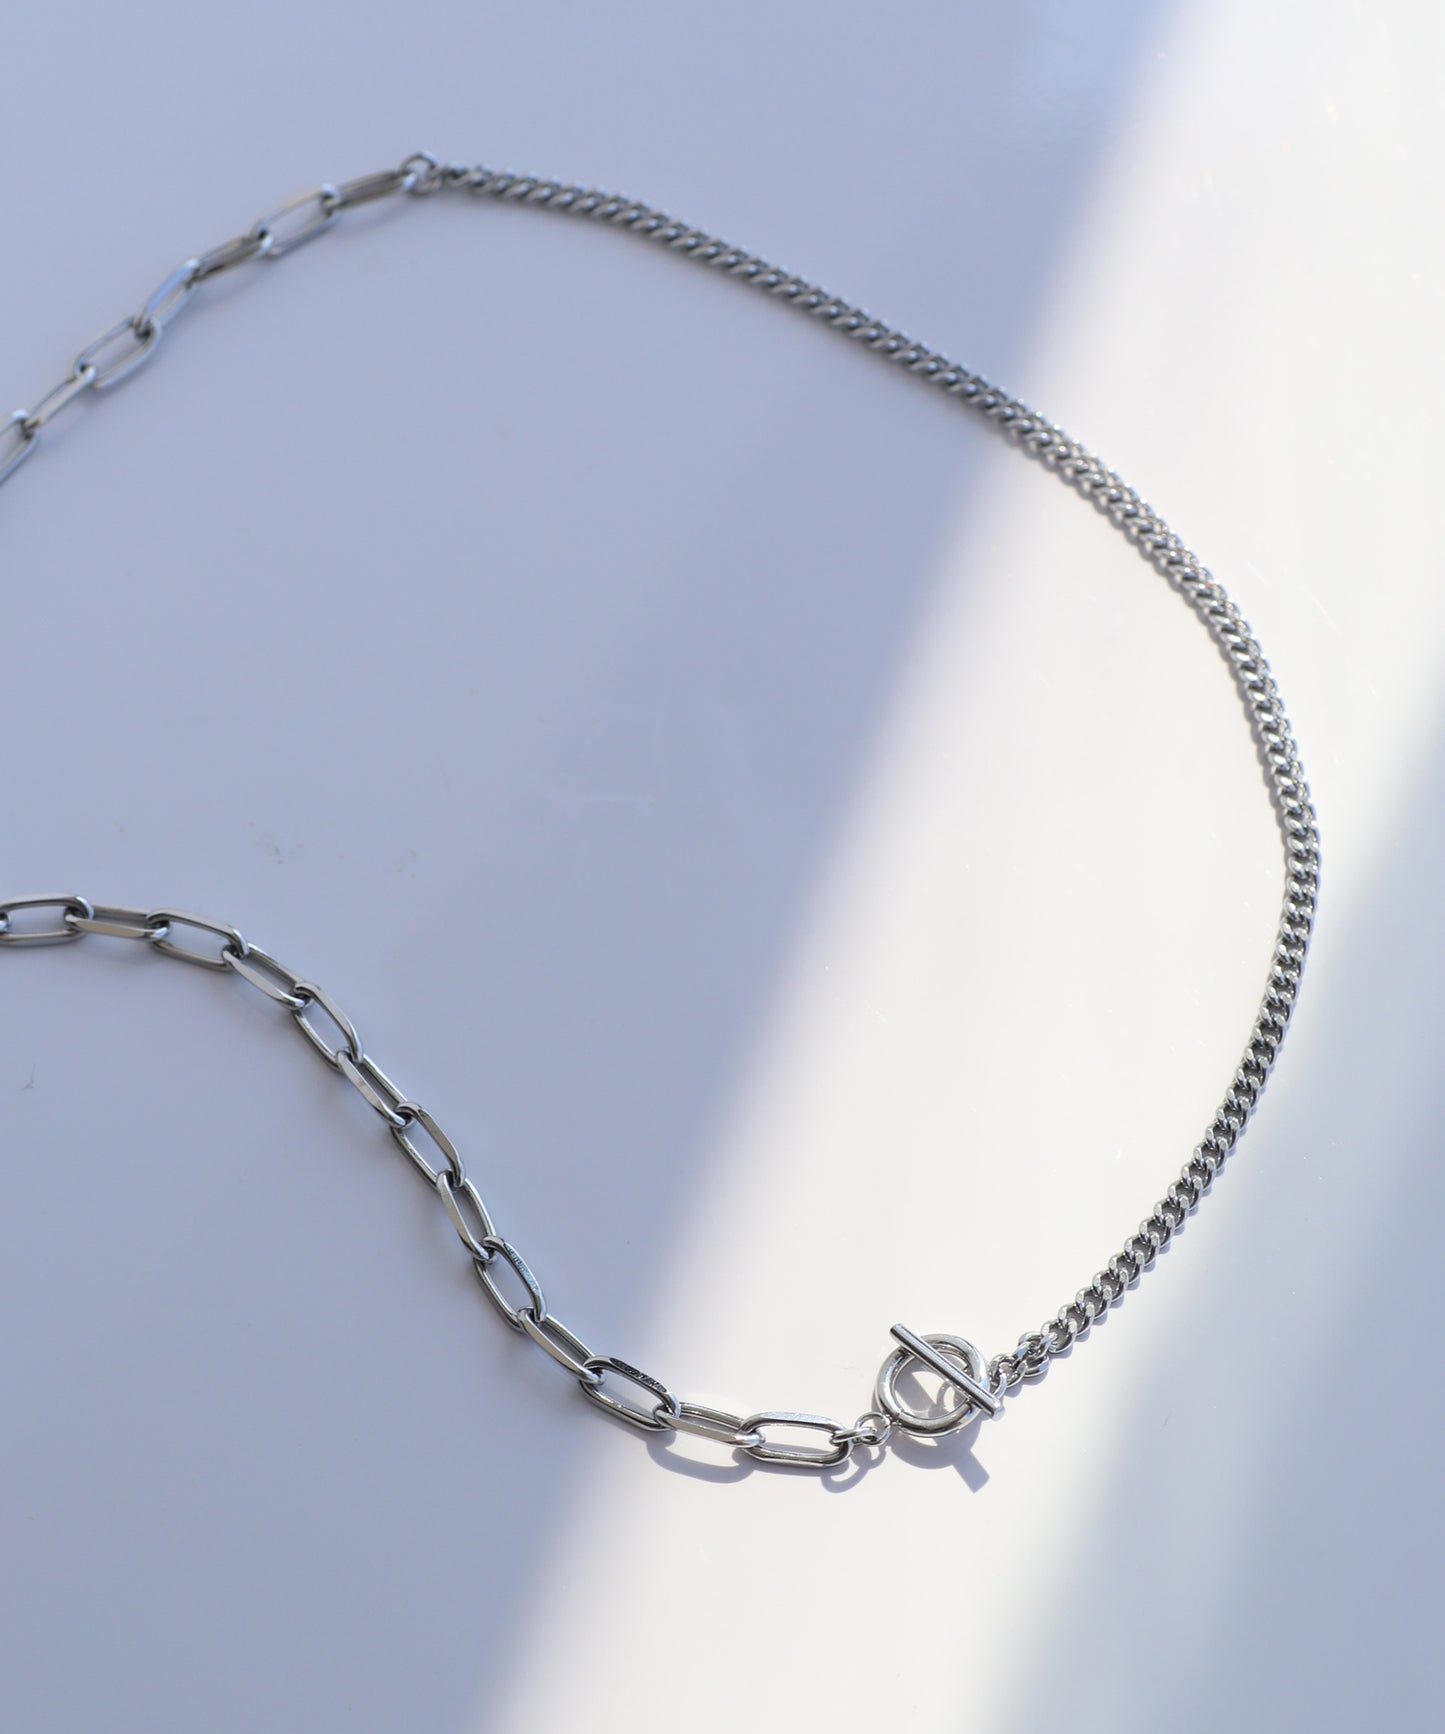 【Stainless Steel IP】Combination Chain Mantel Necklace [E]